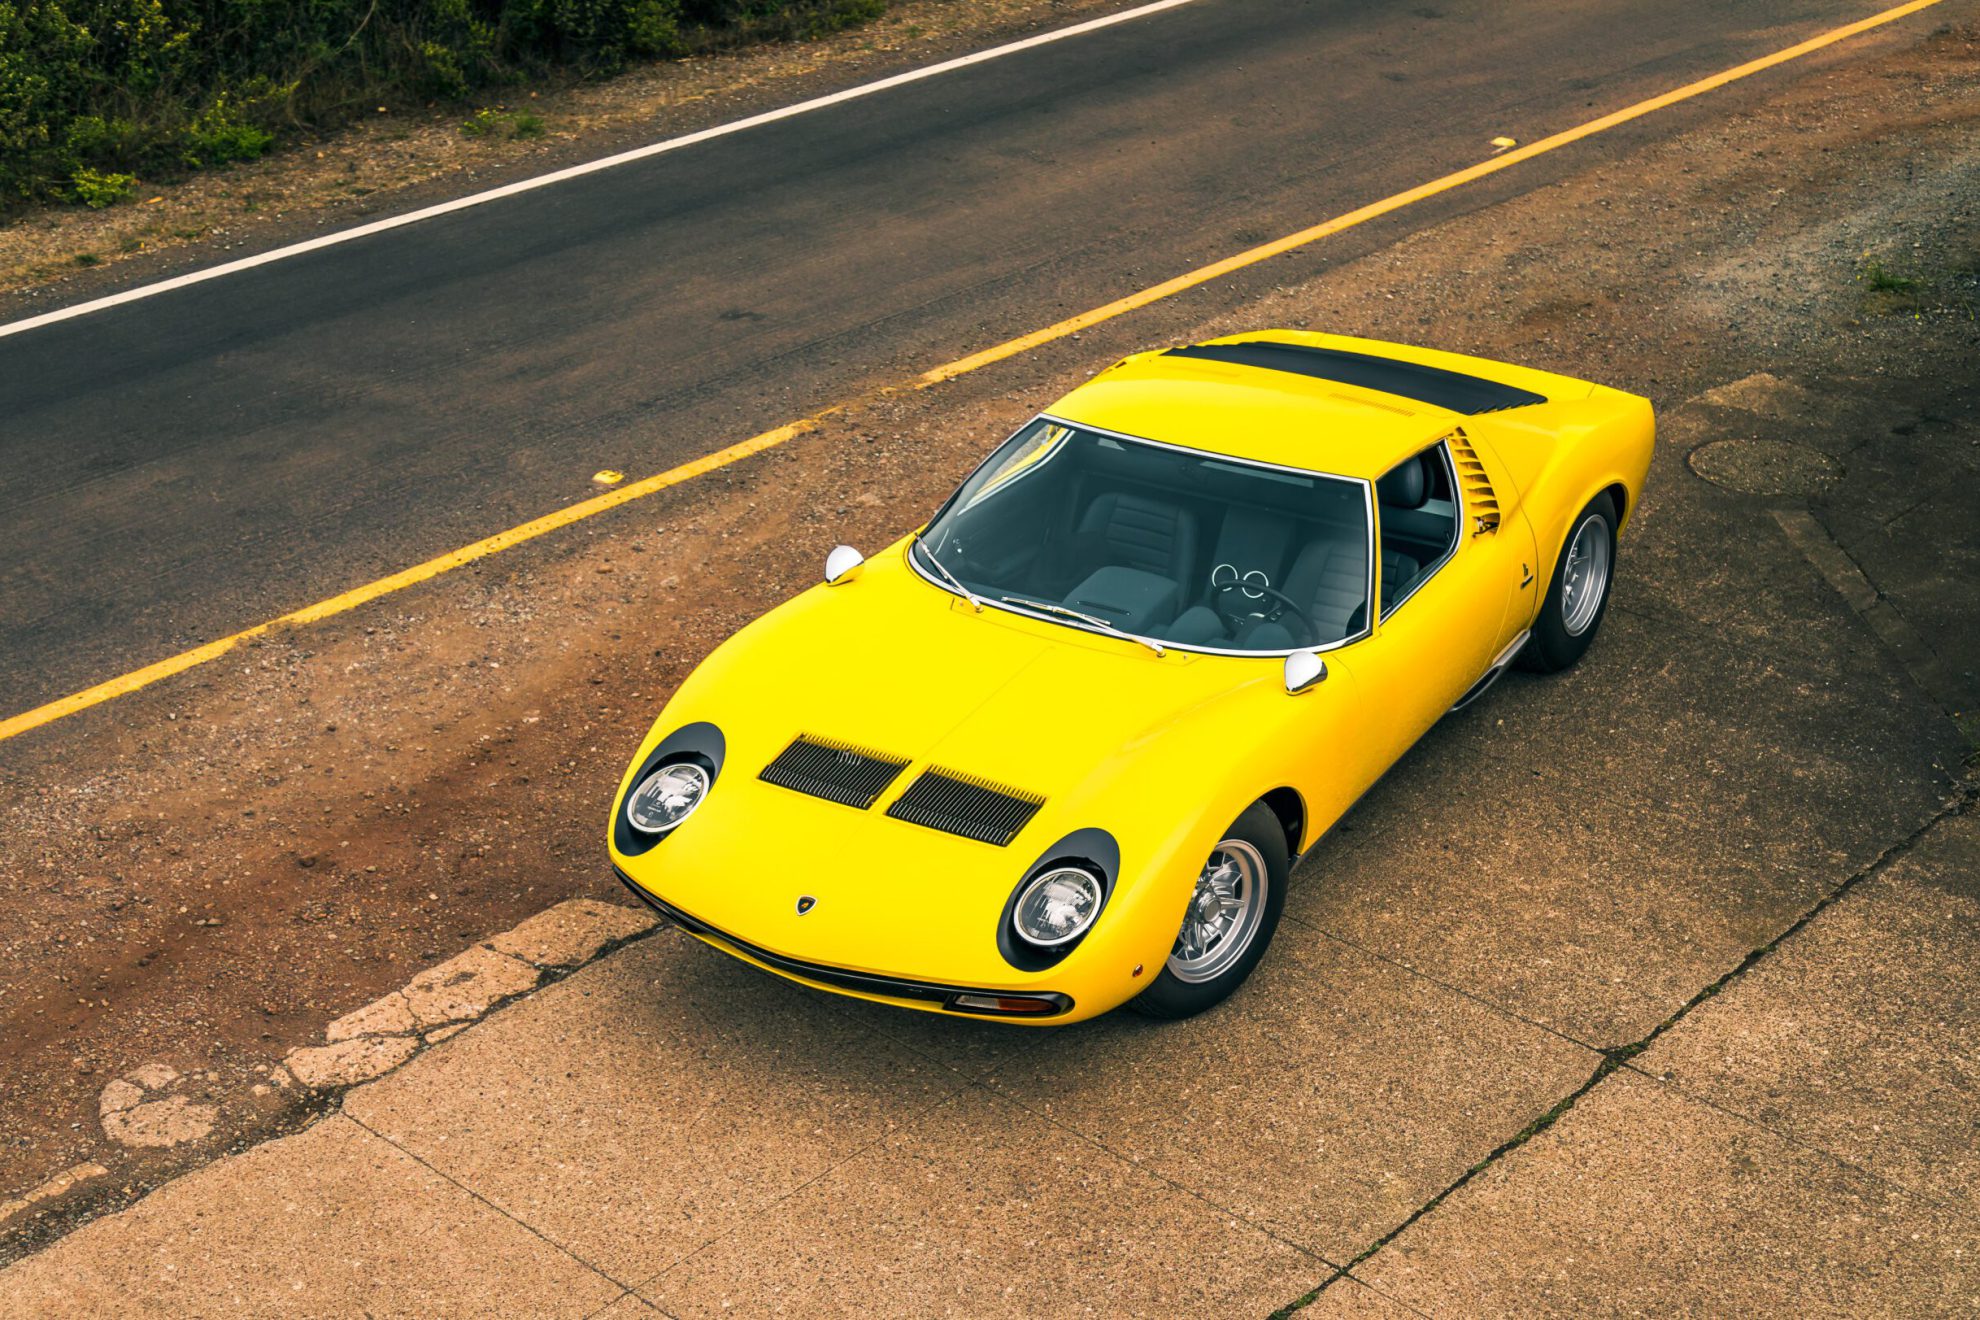 San Fran, CA, USA
11/2/2021
Yellow Lamborghini Miura parked on the side of the road with a yellow line on the road